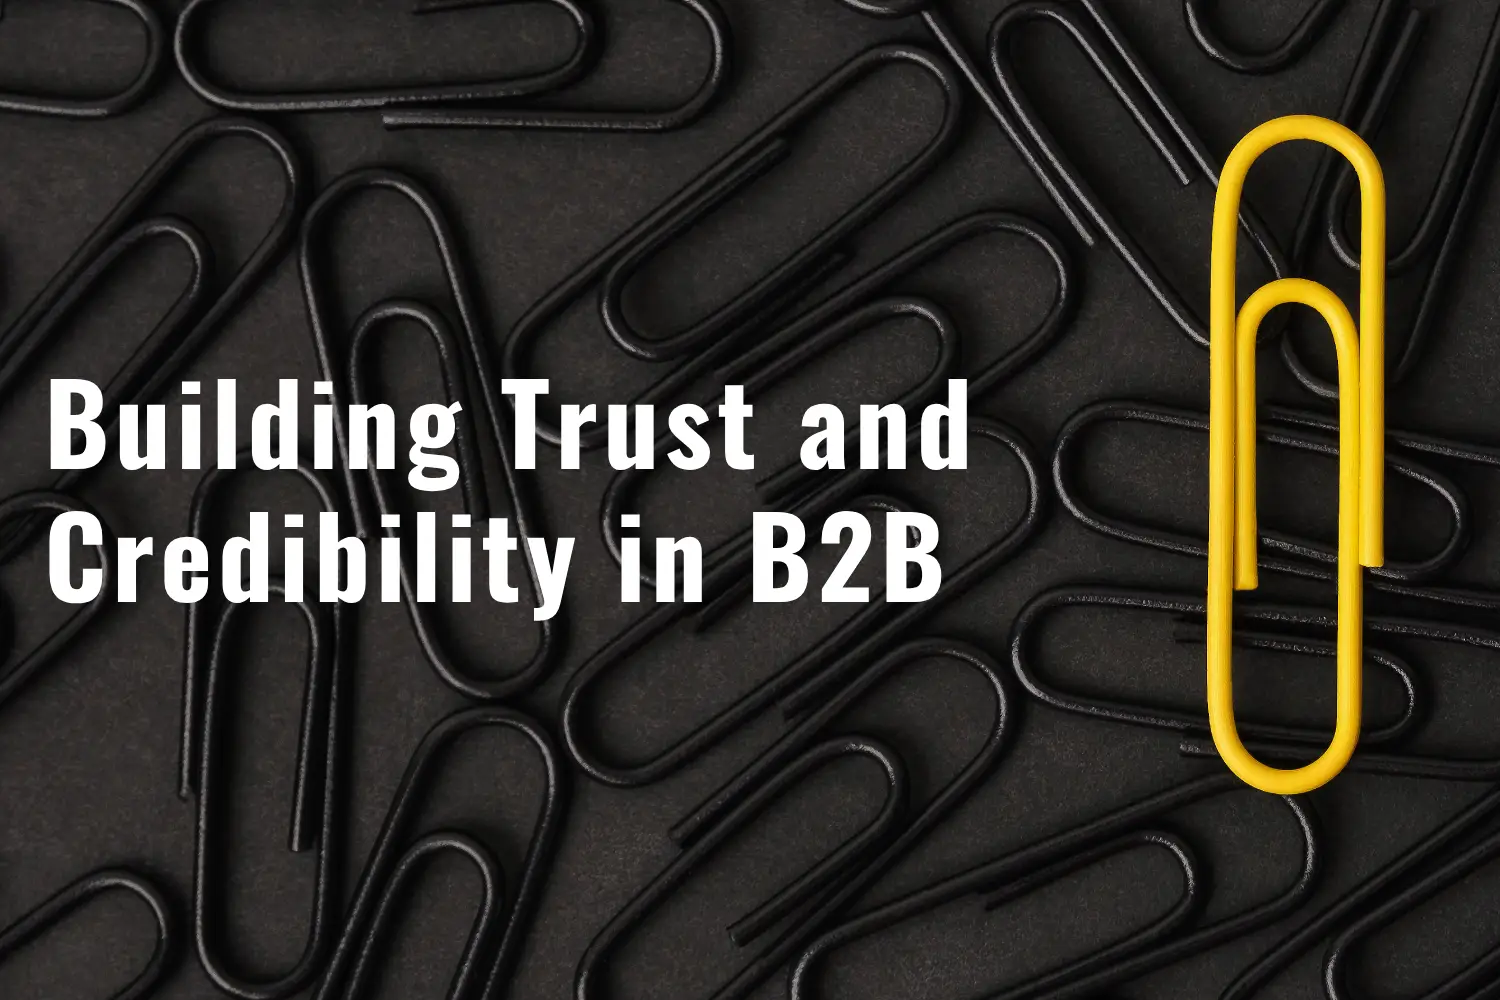 Building Trust And Credibility In B2B